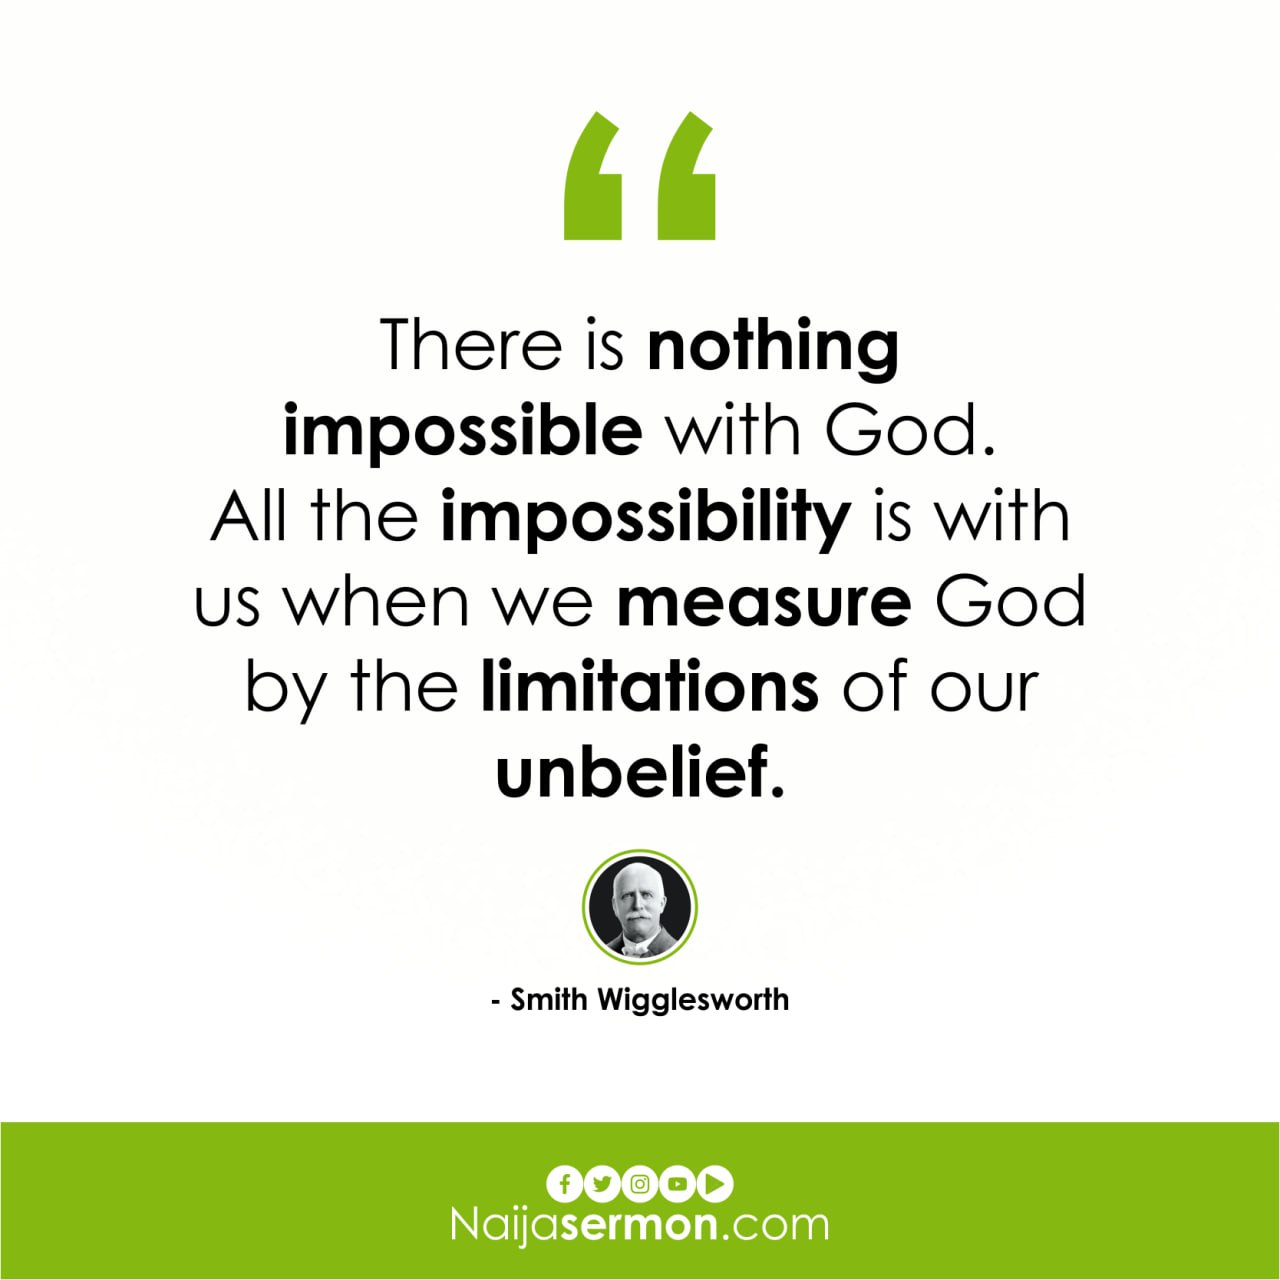 QUOTE OF THE DAY BY SMITH WIGGLESWORTH 8